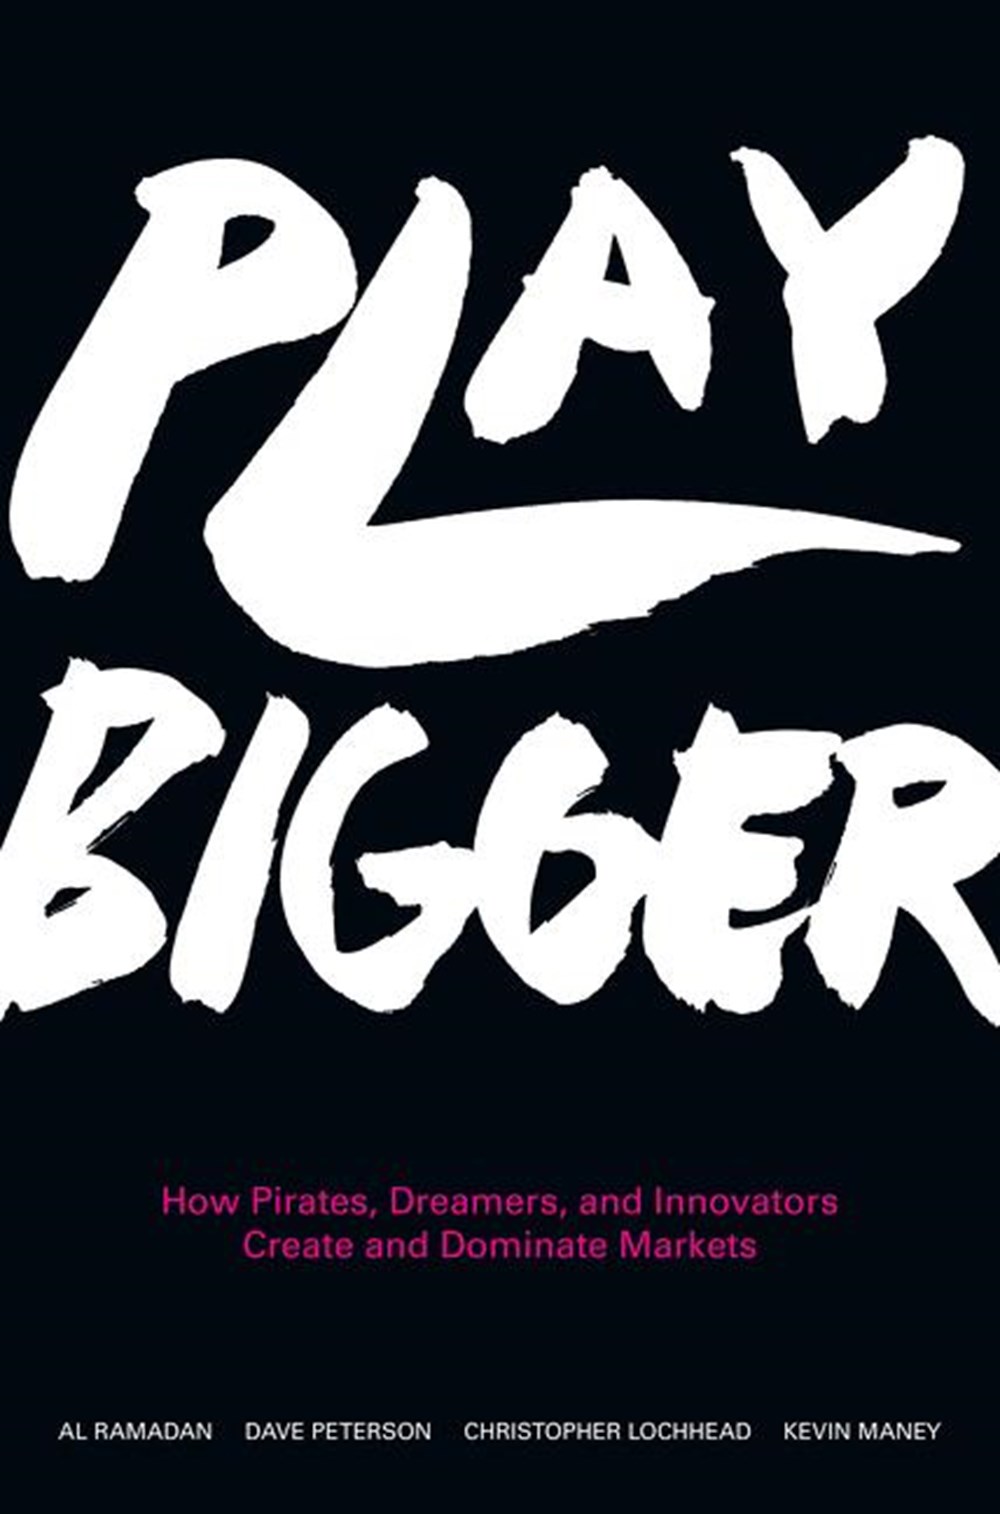 Play Bigger How Pirates, Dreamers, and Innovators Create and Dominate Markets